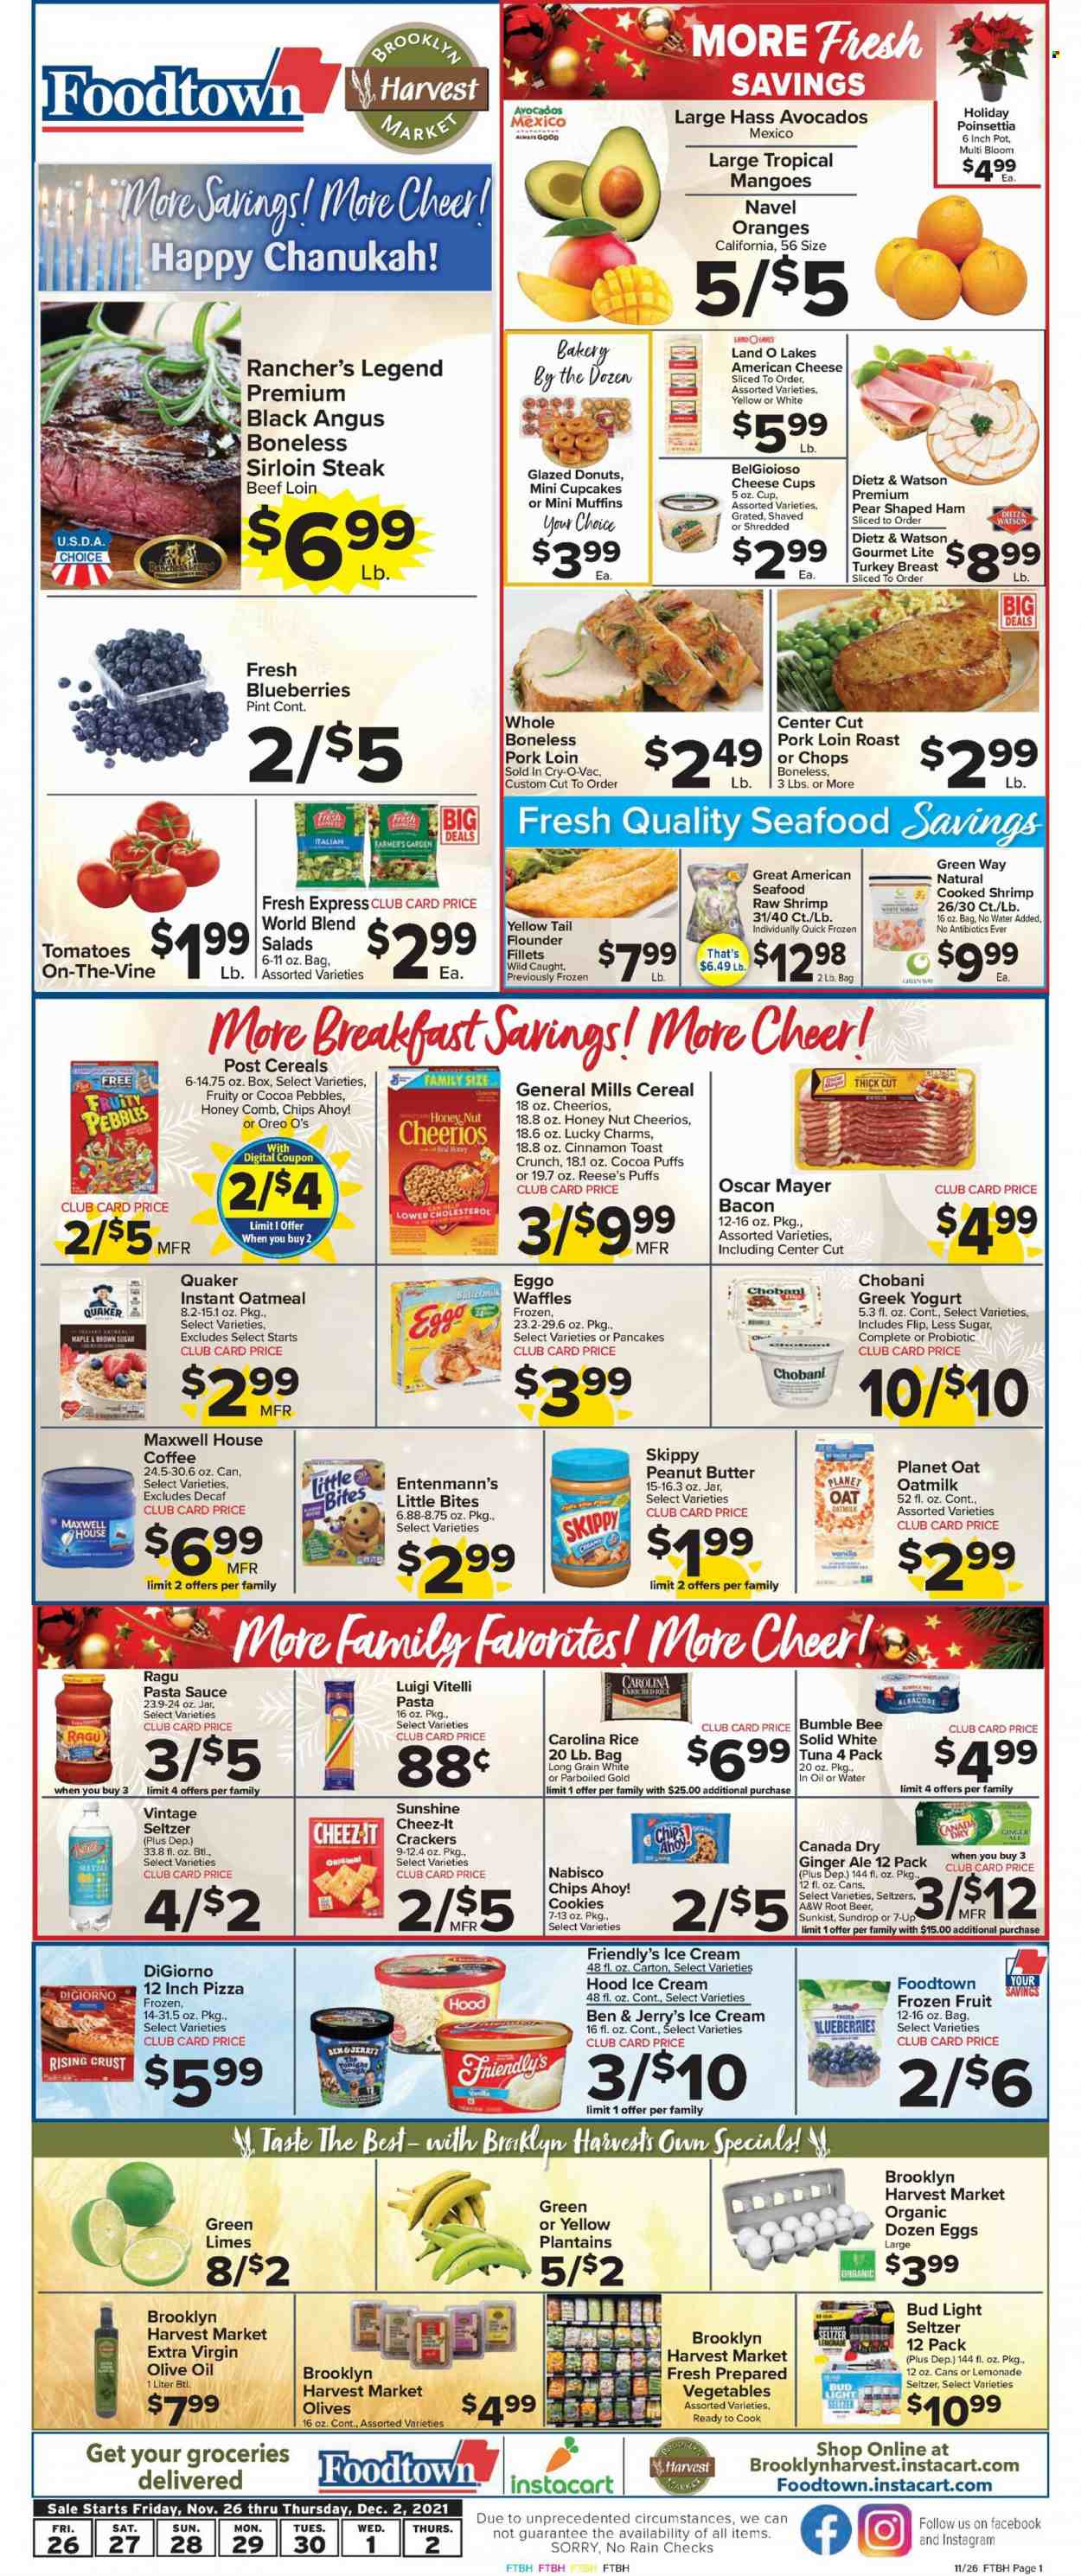 thumbnail - Foodtown Flyer - 11/26/2021 - 12/02/2021 - Sales products - cupcake, puffs, donut, muffin, waffles, Entenmann's, salad, avocado, blueberries, limes, oranges, flounder, tuna, seafood, shrimps, pizza, pasta sauce, Bumble Bee, sauce, Quaker, ragú pasta, ham, Oscar Mayer, Dietz & Watson, american cheese, cheese cup, parmesan, greek yoghurt, Oreo, yoghurt, Chobani, buttermilk, oat milk, eggs, Sunshine, ice cream, Reese's, Ben & Jerry's, Friendly's Ice Cream, cookies, crackers, Chips Ahoy!, Little Bites, Cheez-It, oatmeal, olives, cereals, Cheerios, Fruity Pebbles, rice, cinnamon, ragu, extra virgin olive oil, olive oil, peanut butter, Canada Dry, ginger ale, lemonade, 7UP, A&W, Maxwell House, coffee, Hard Seltzer, beer, Bud Light, turkey breast, beef sirloin, steak, sirloin steak, pork loin, pork meat, comb, pot, poinsettia, plantains, navel oranges. Page 1.